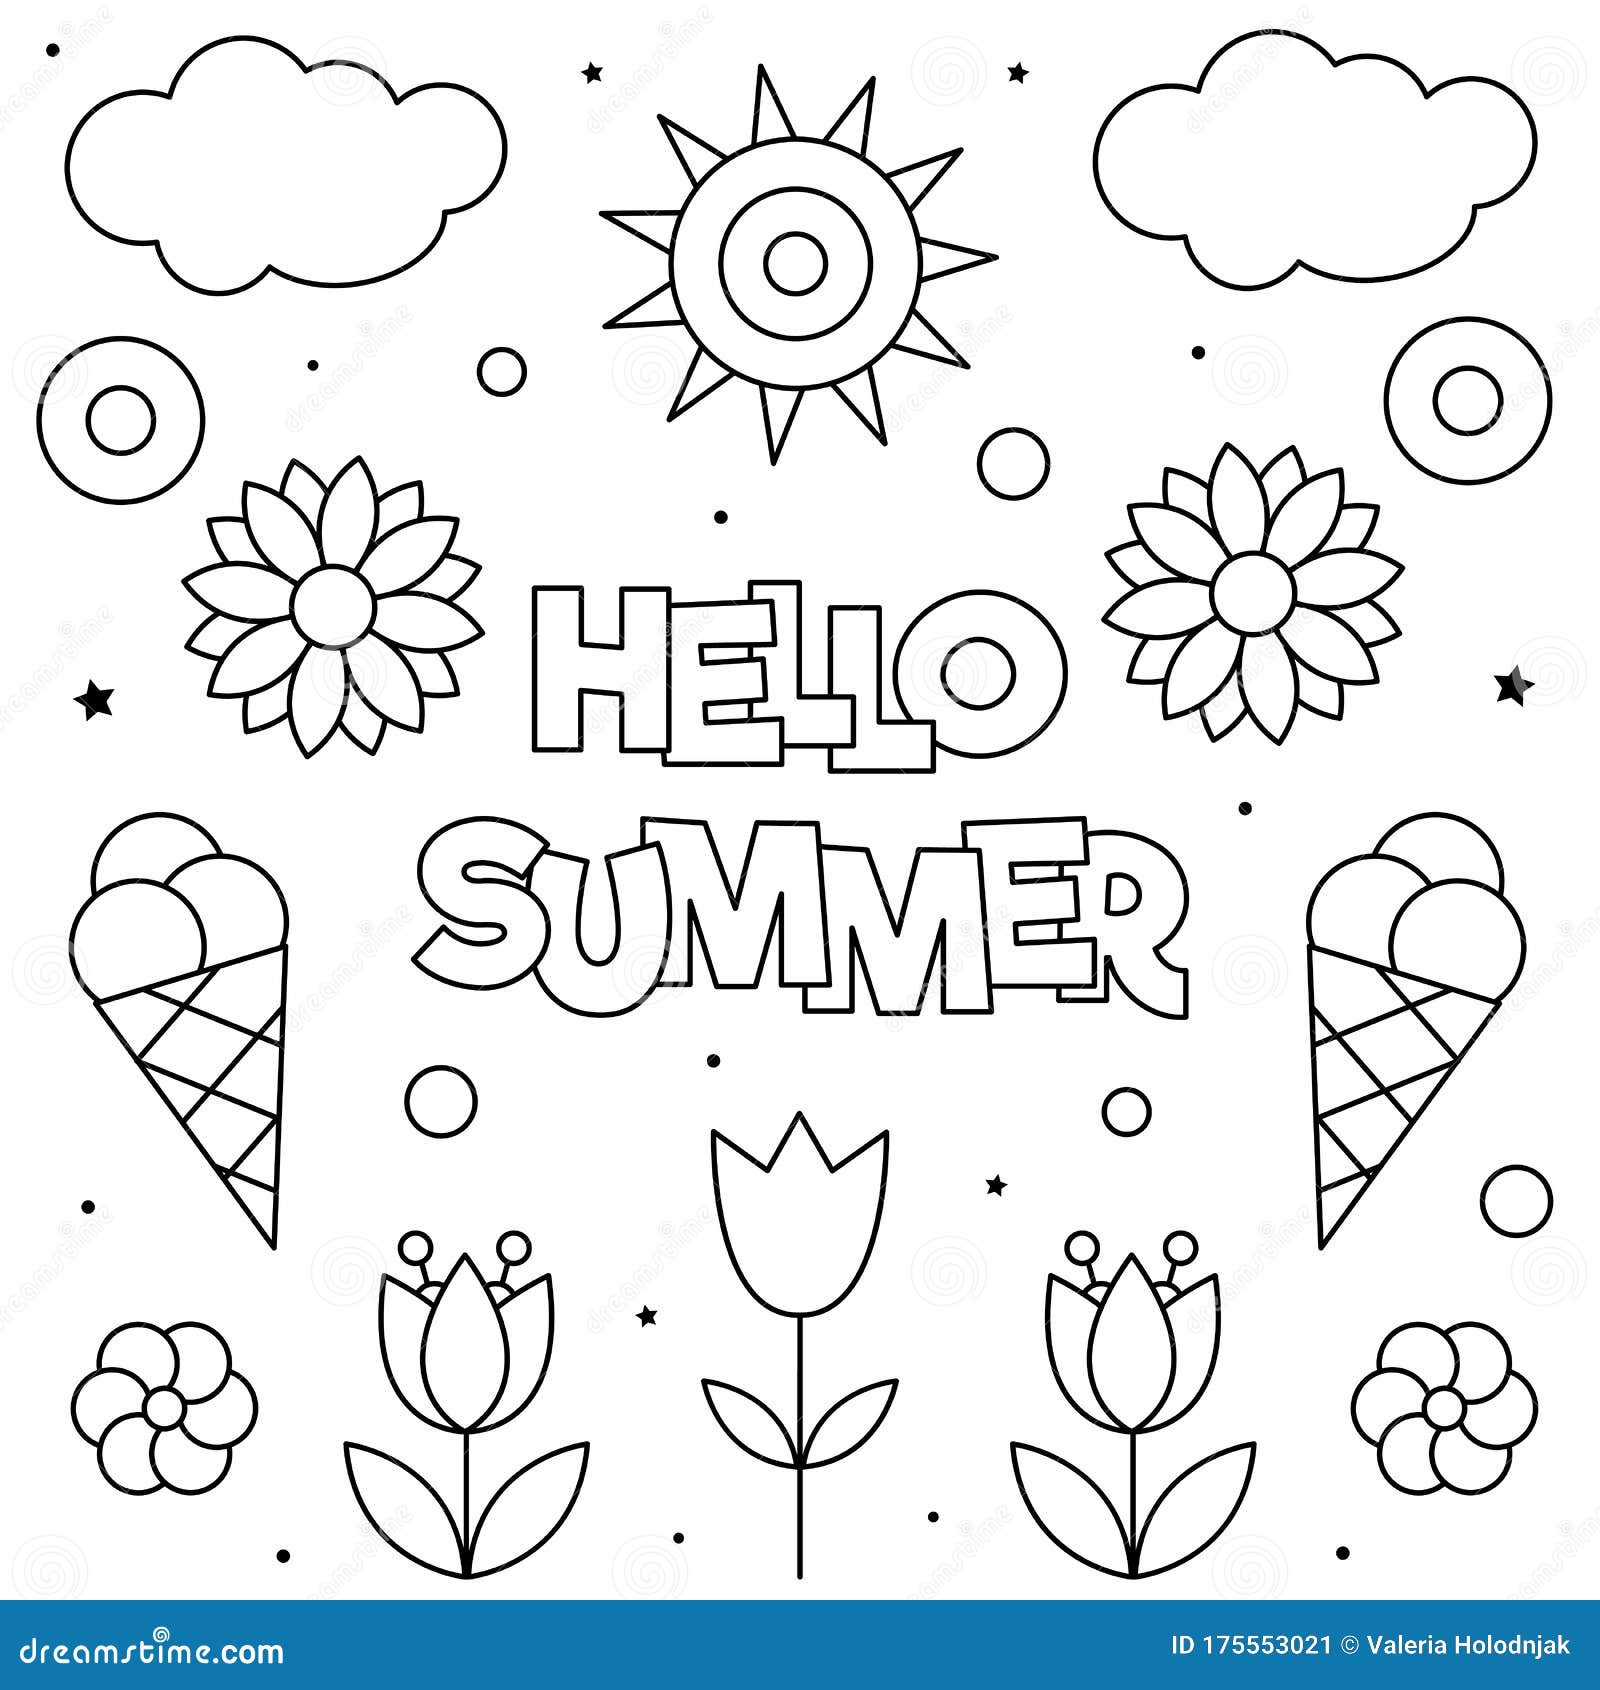 Hello Summer. Coloring Page. Black and White Vector Illustration. Stock